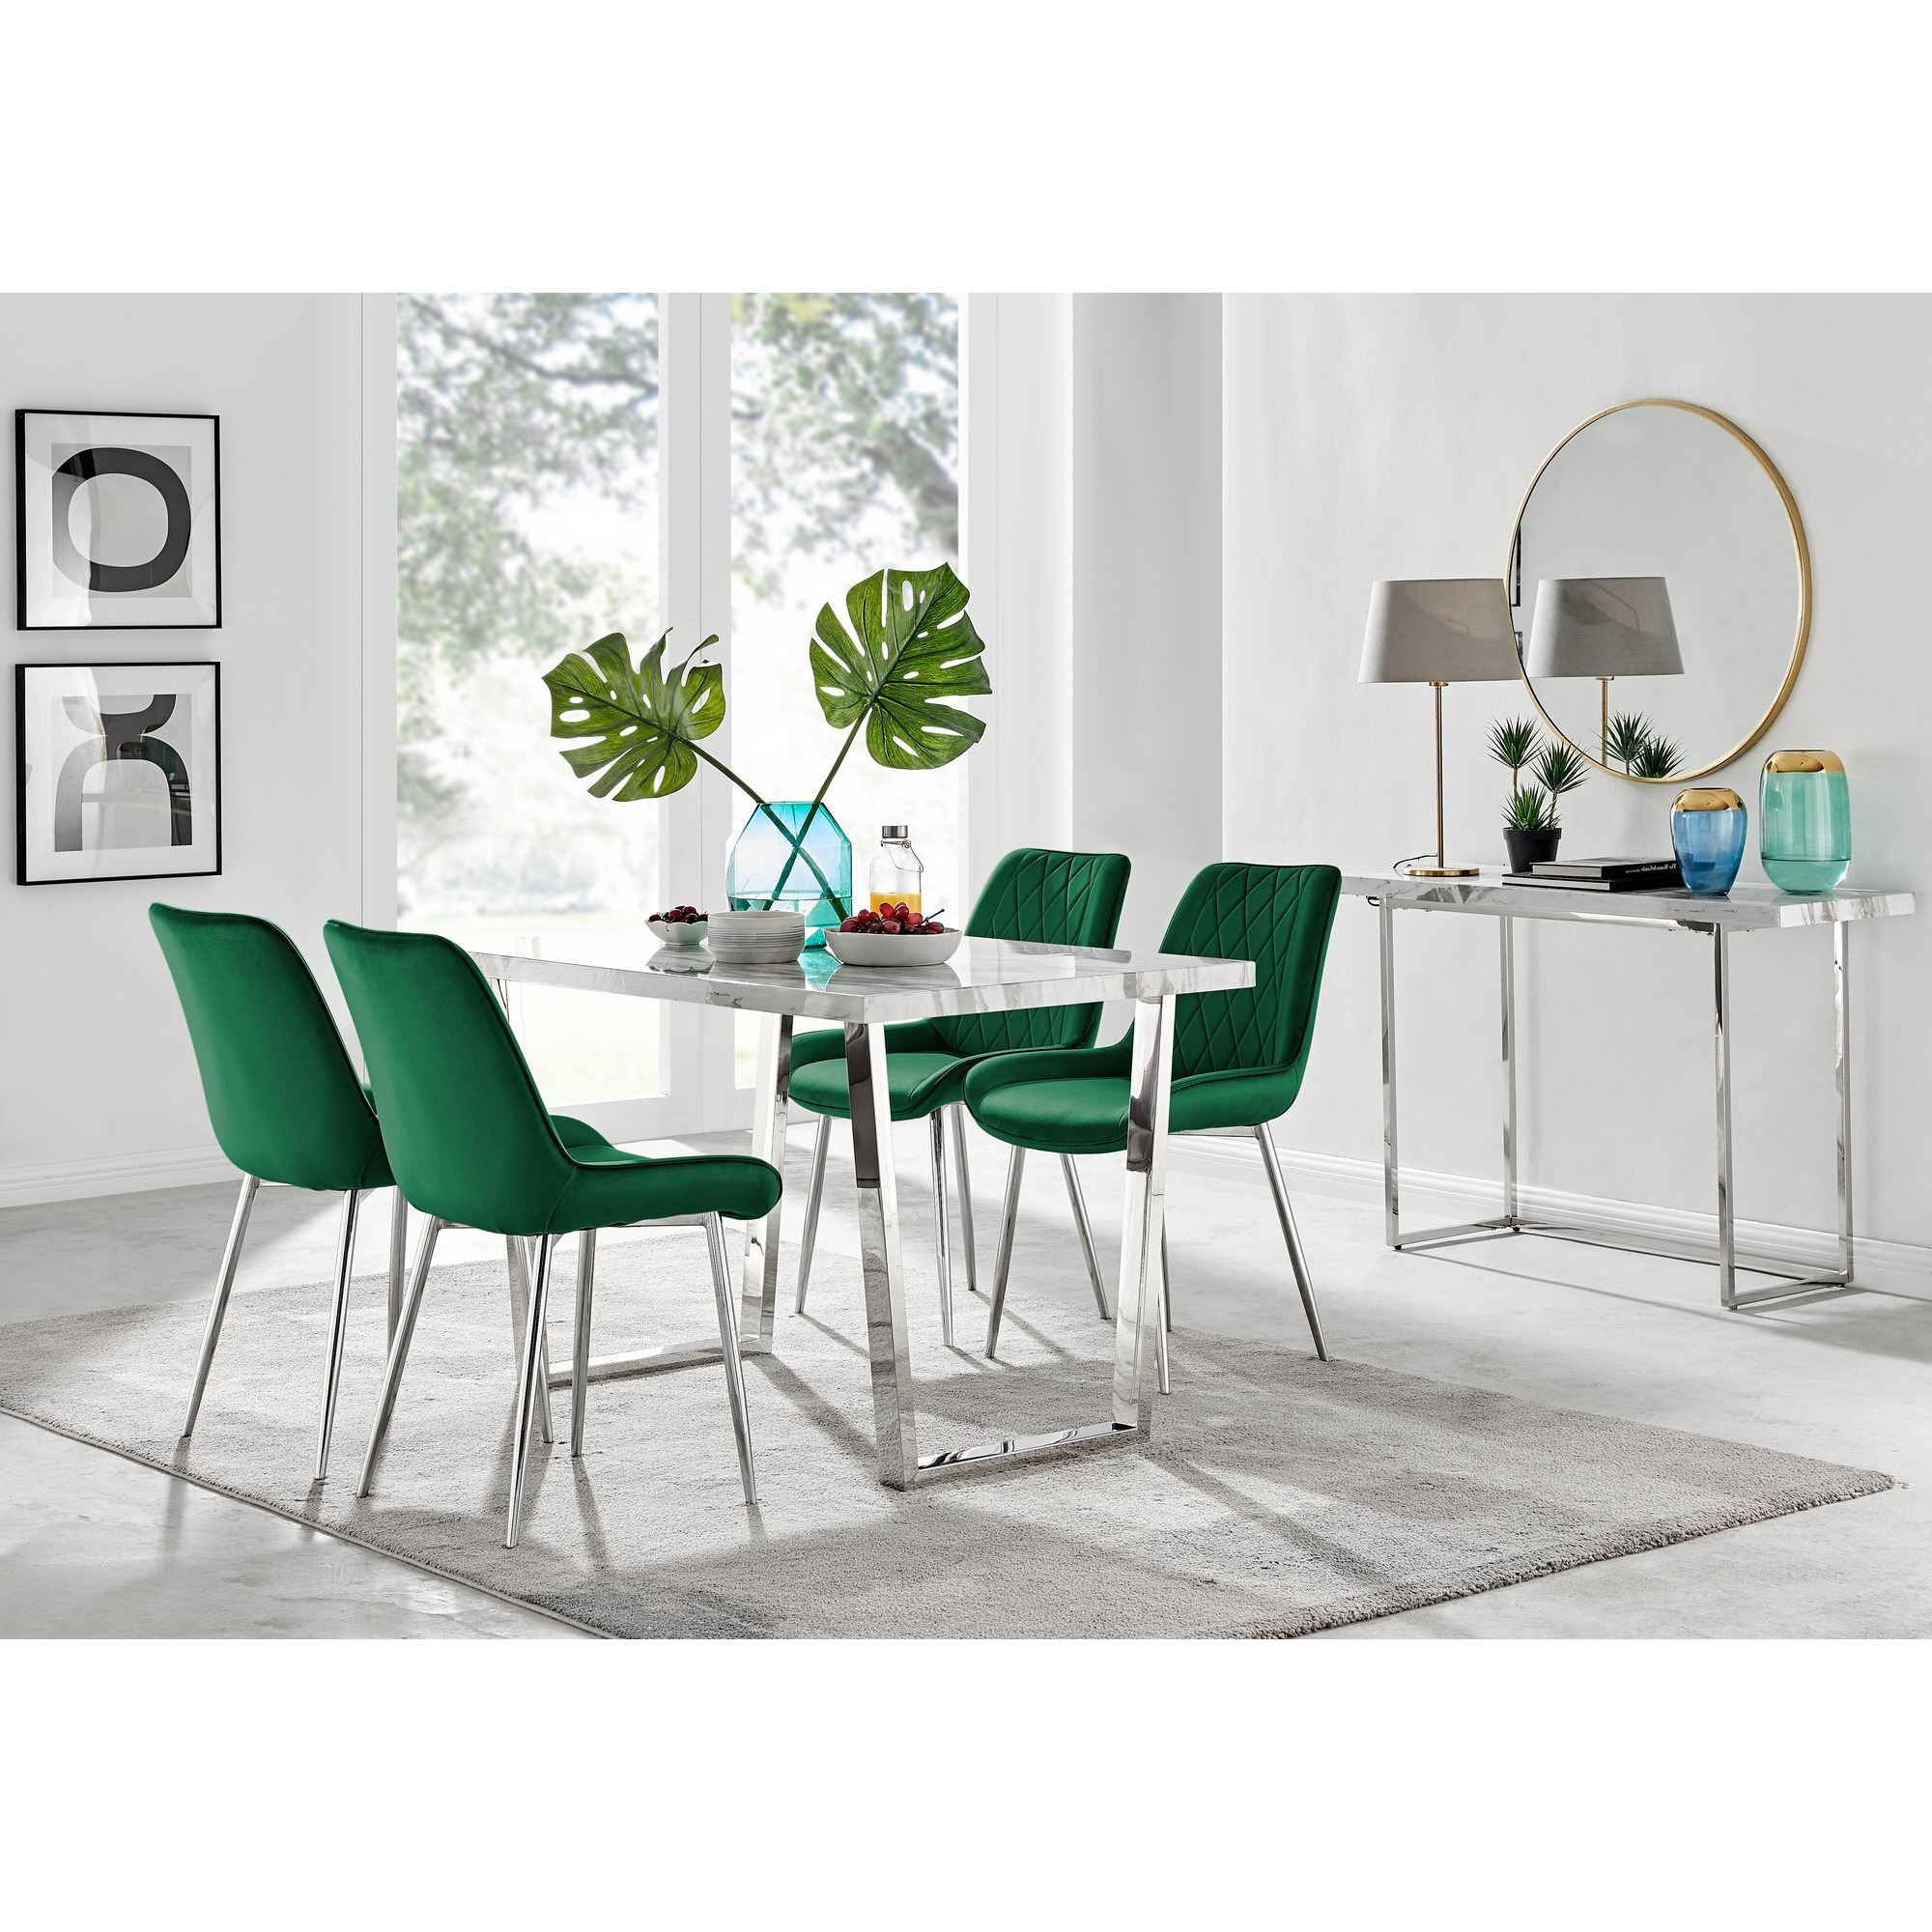 Kylo White Marble Effect Dining Table & 4 Pesaro Silver Chairs